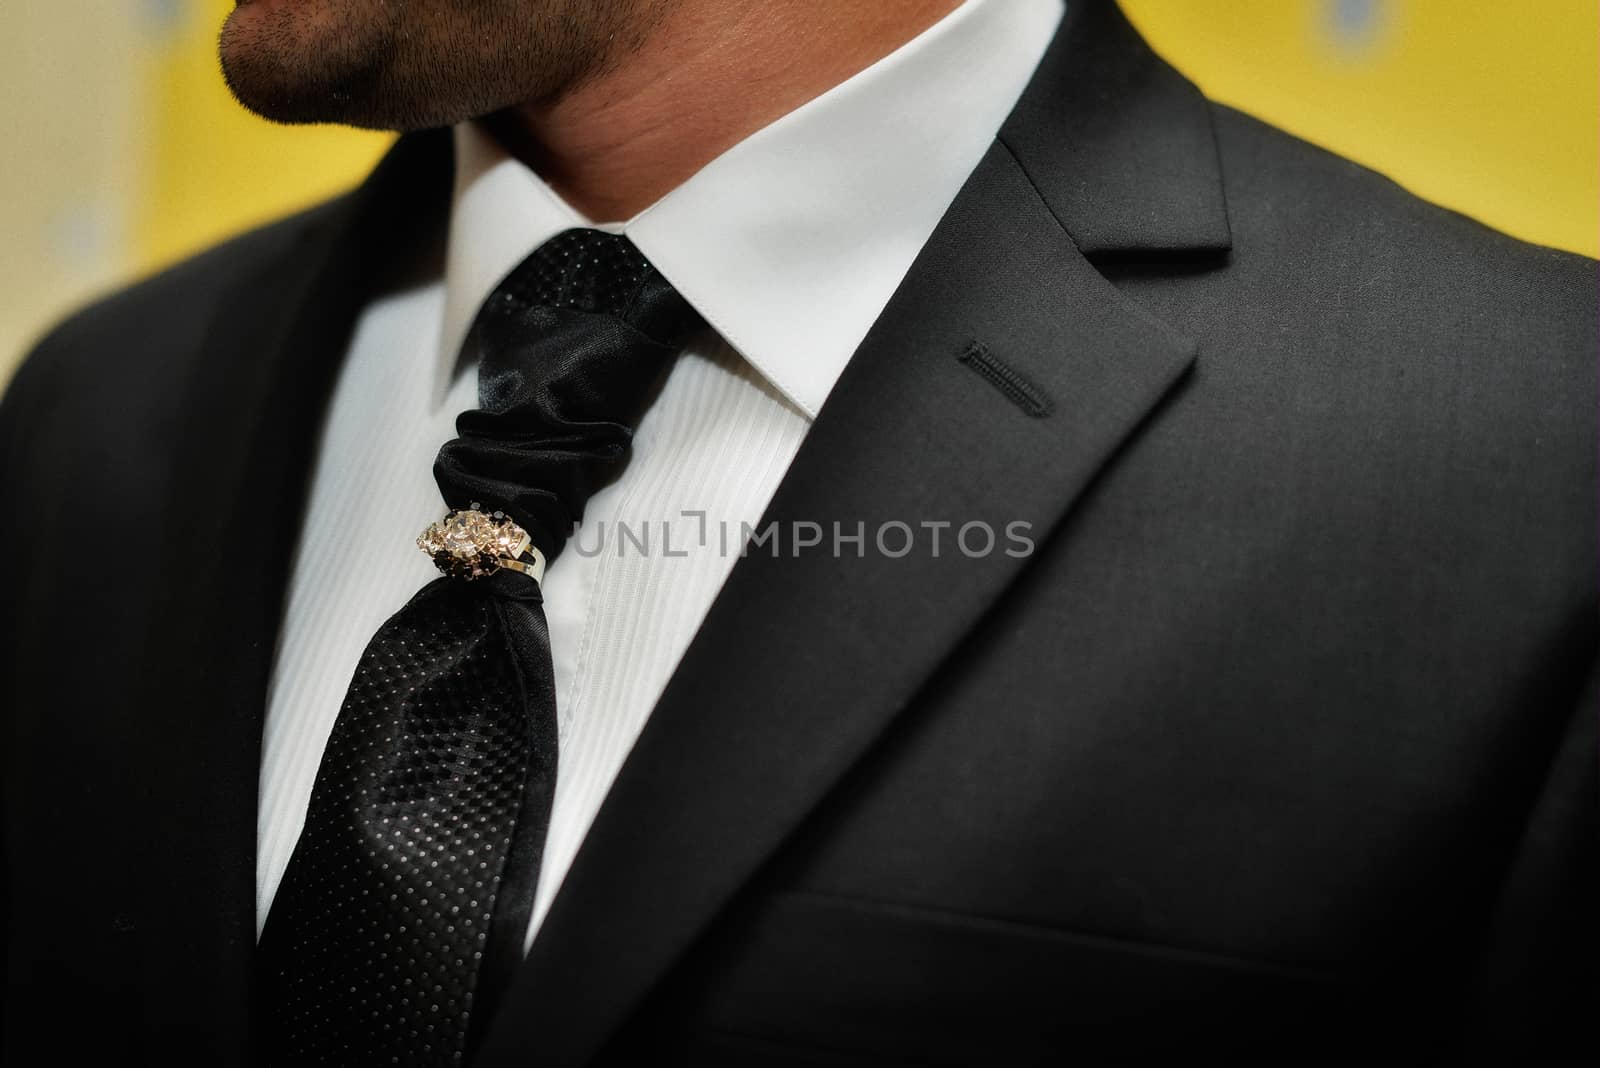 Expensive suit. Classically tie and luxury tie clip by marynkin